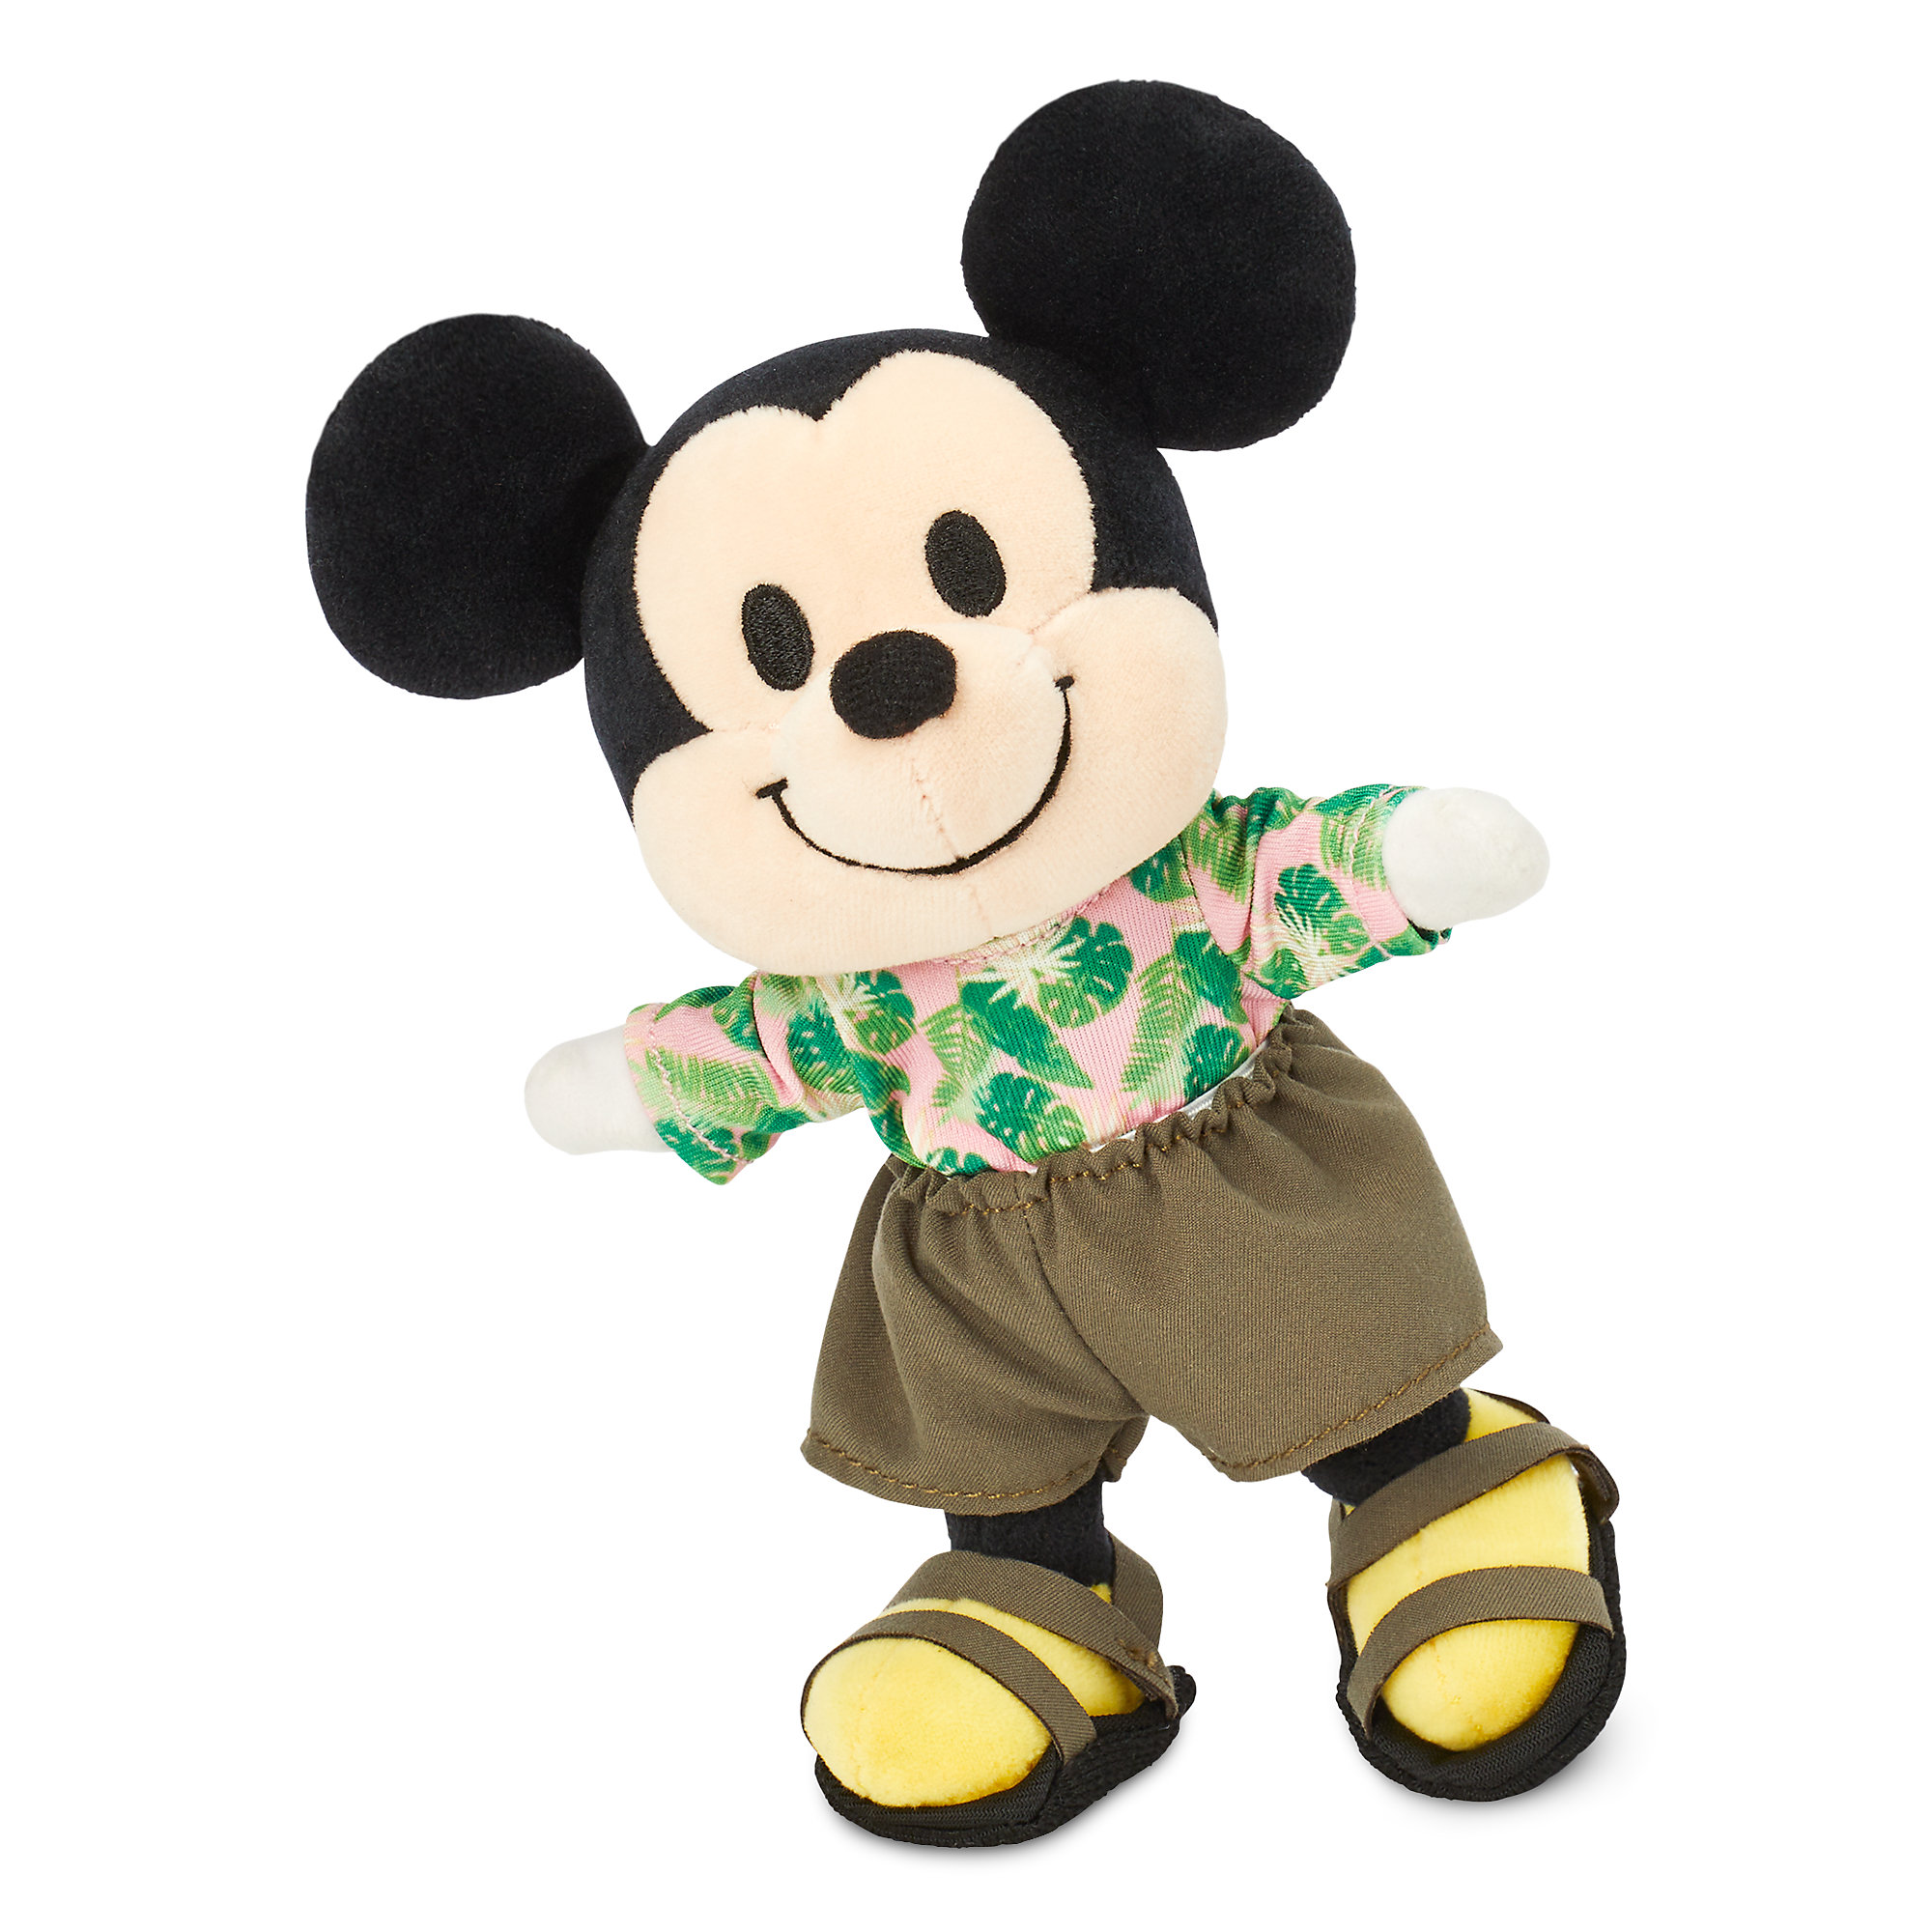 The Disney nuiMOs May Collection Is Ready For Summer